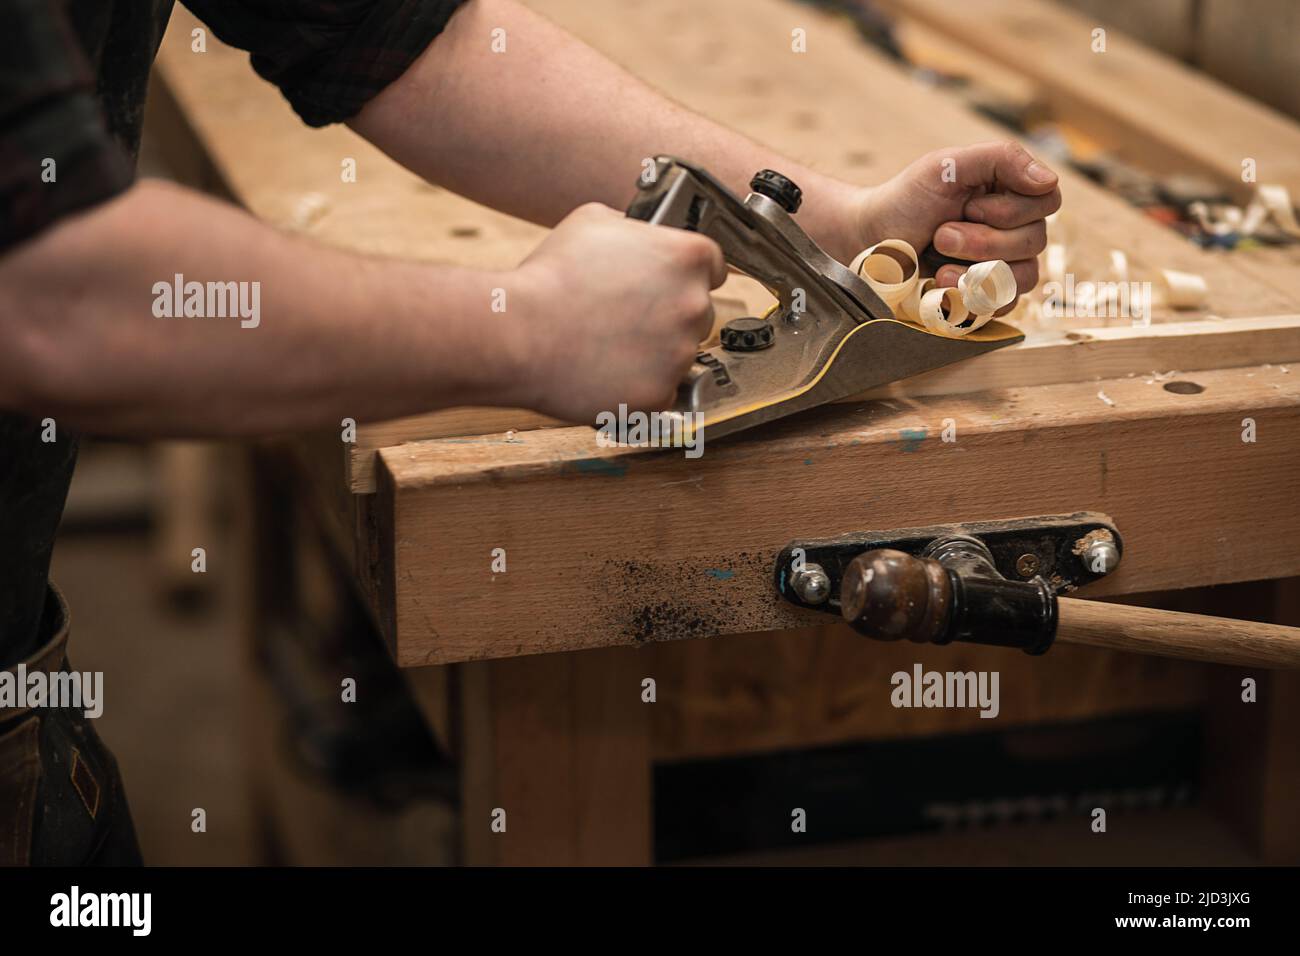 Close-up joiner hands working with wood timber, cutting, sharping by plane, shavings flying around workbench. Business Stock Photo